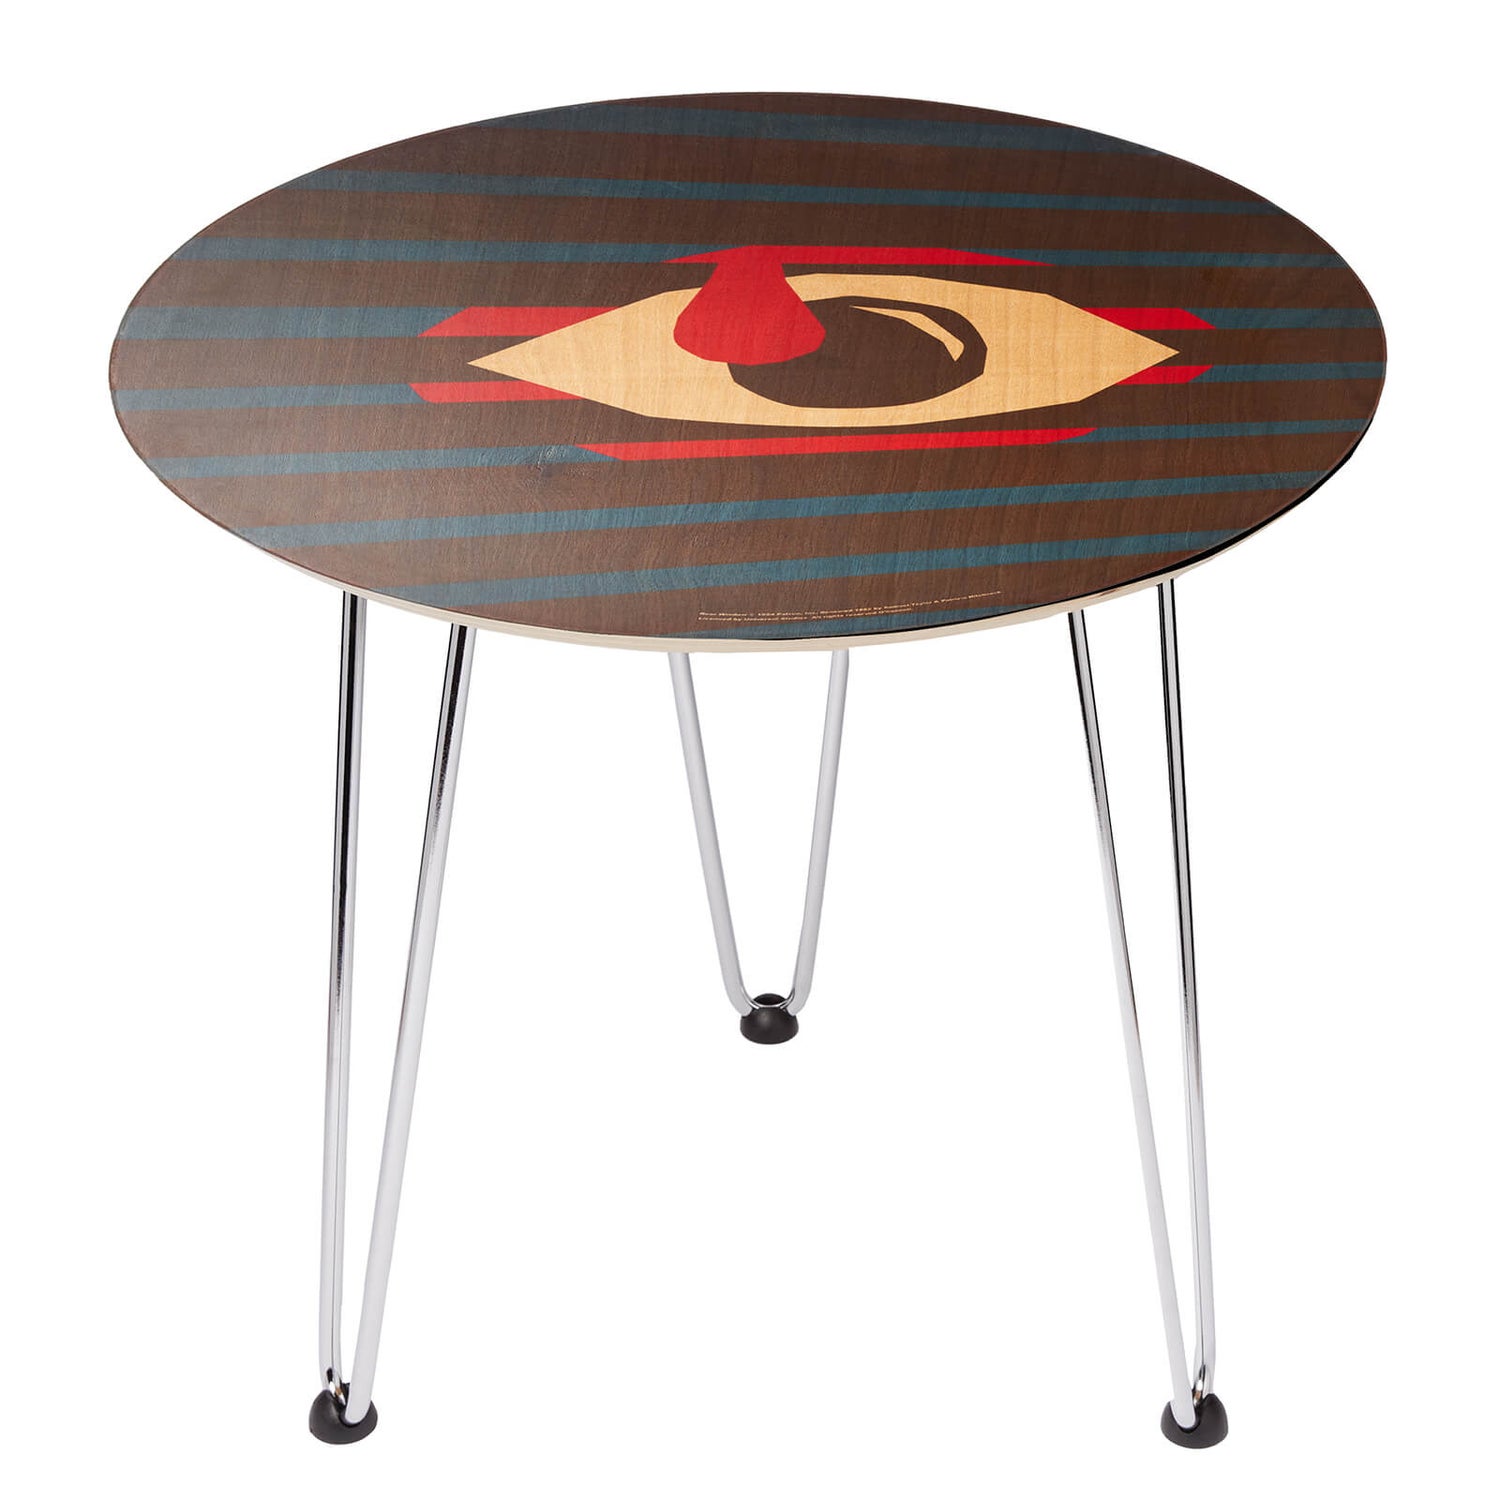 Decorsome x Hitchcock Rear Window Spy Wooden Side Table